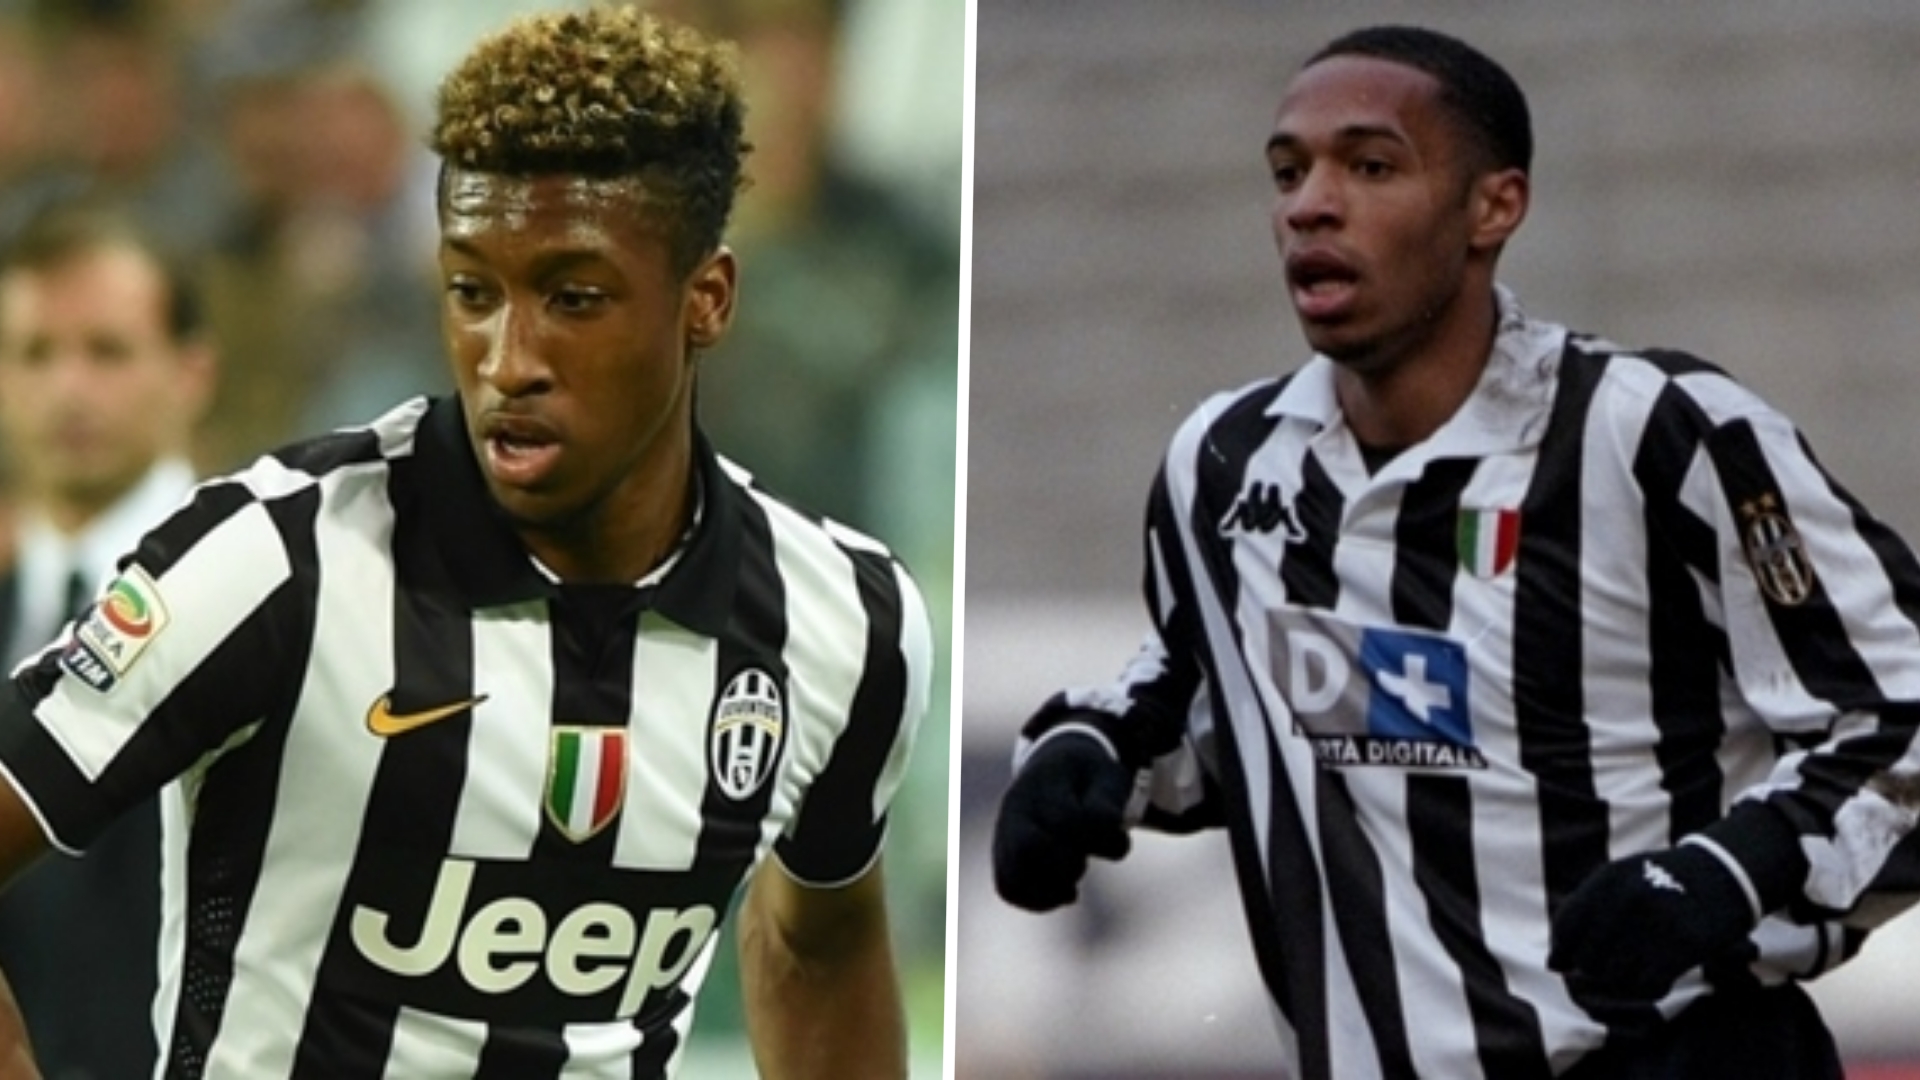 ‘Coman joins Henry on list of Juventus mistakes’ – Capello blasts Bianconeri for parting with top talent